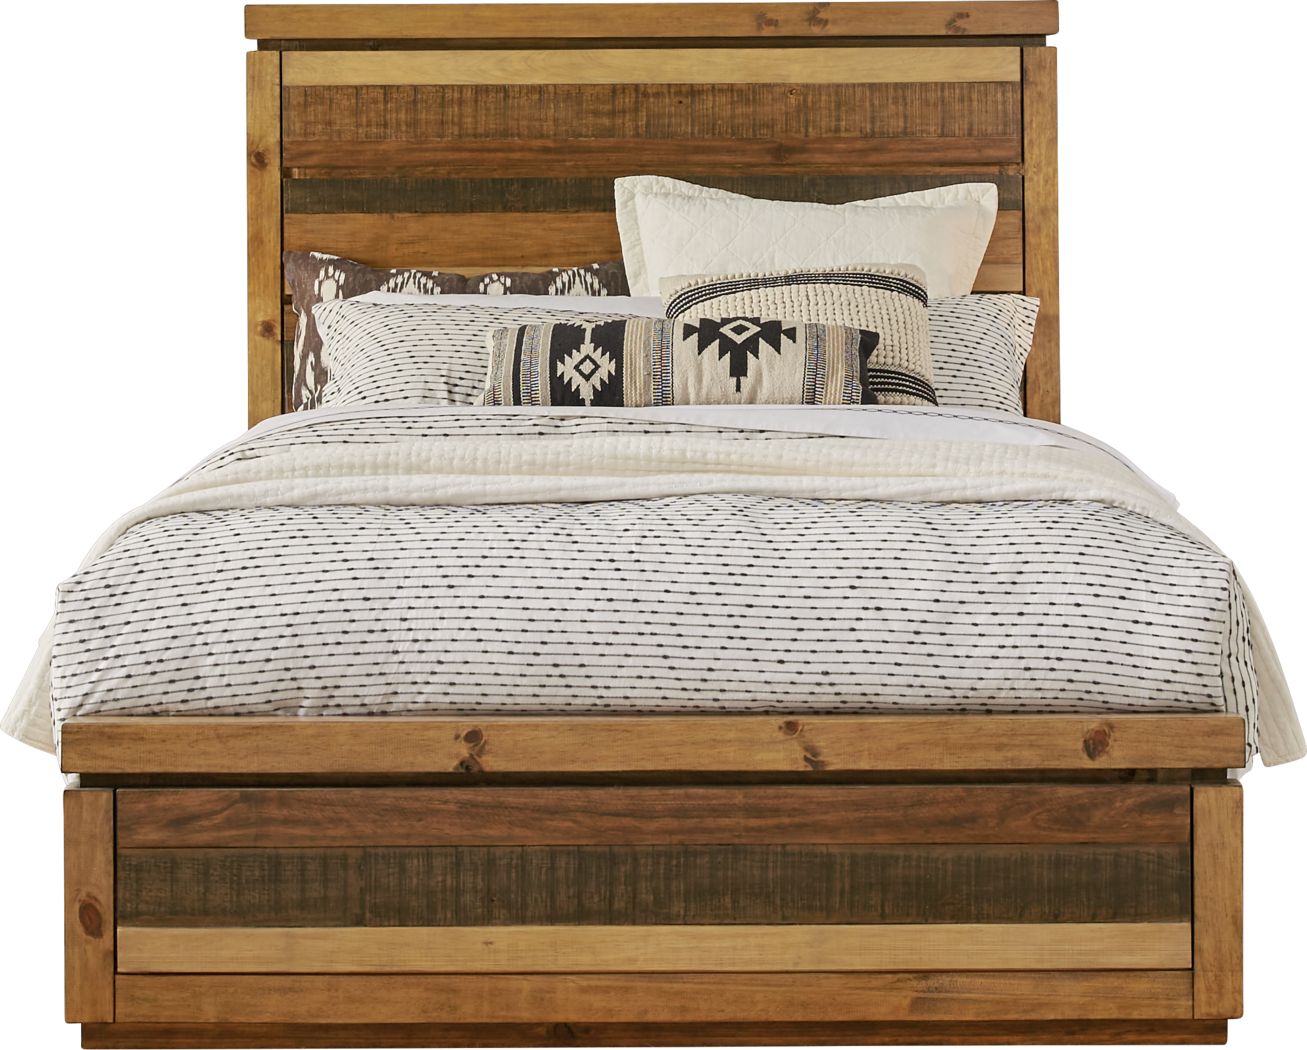 Rustic King Size Beds Frames, Rustic King Bed With Drawers